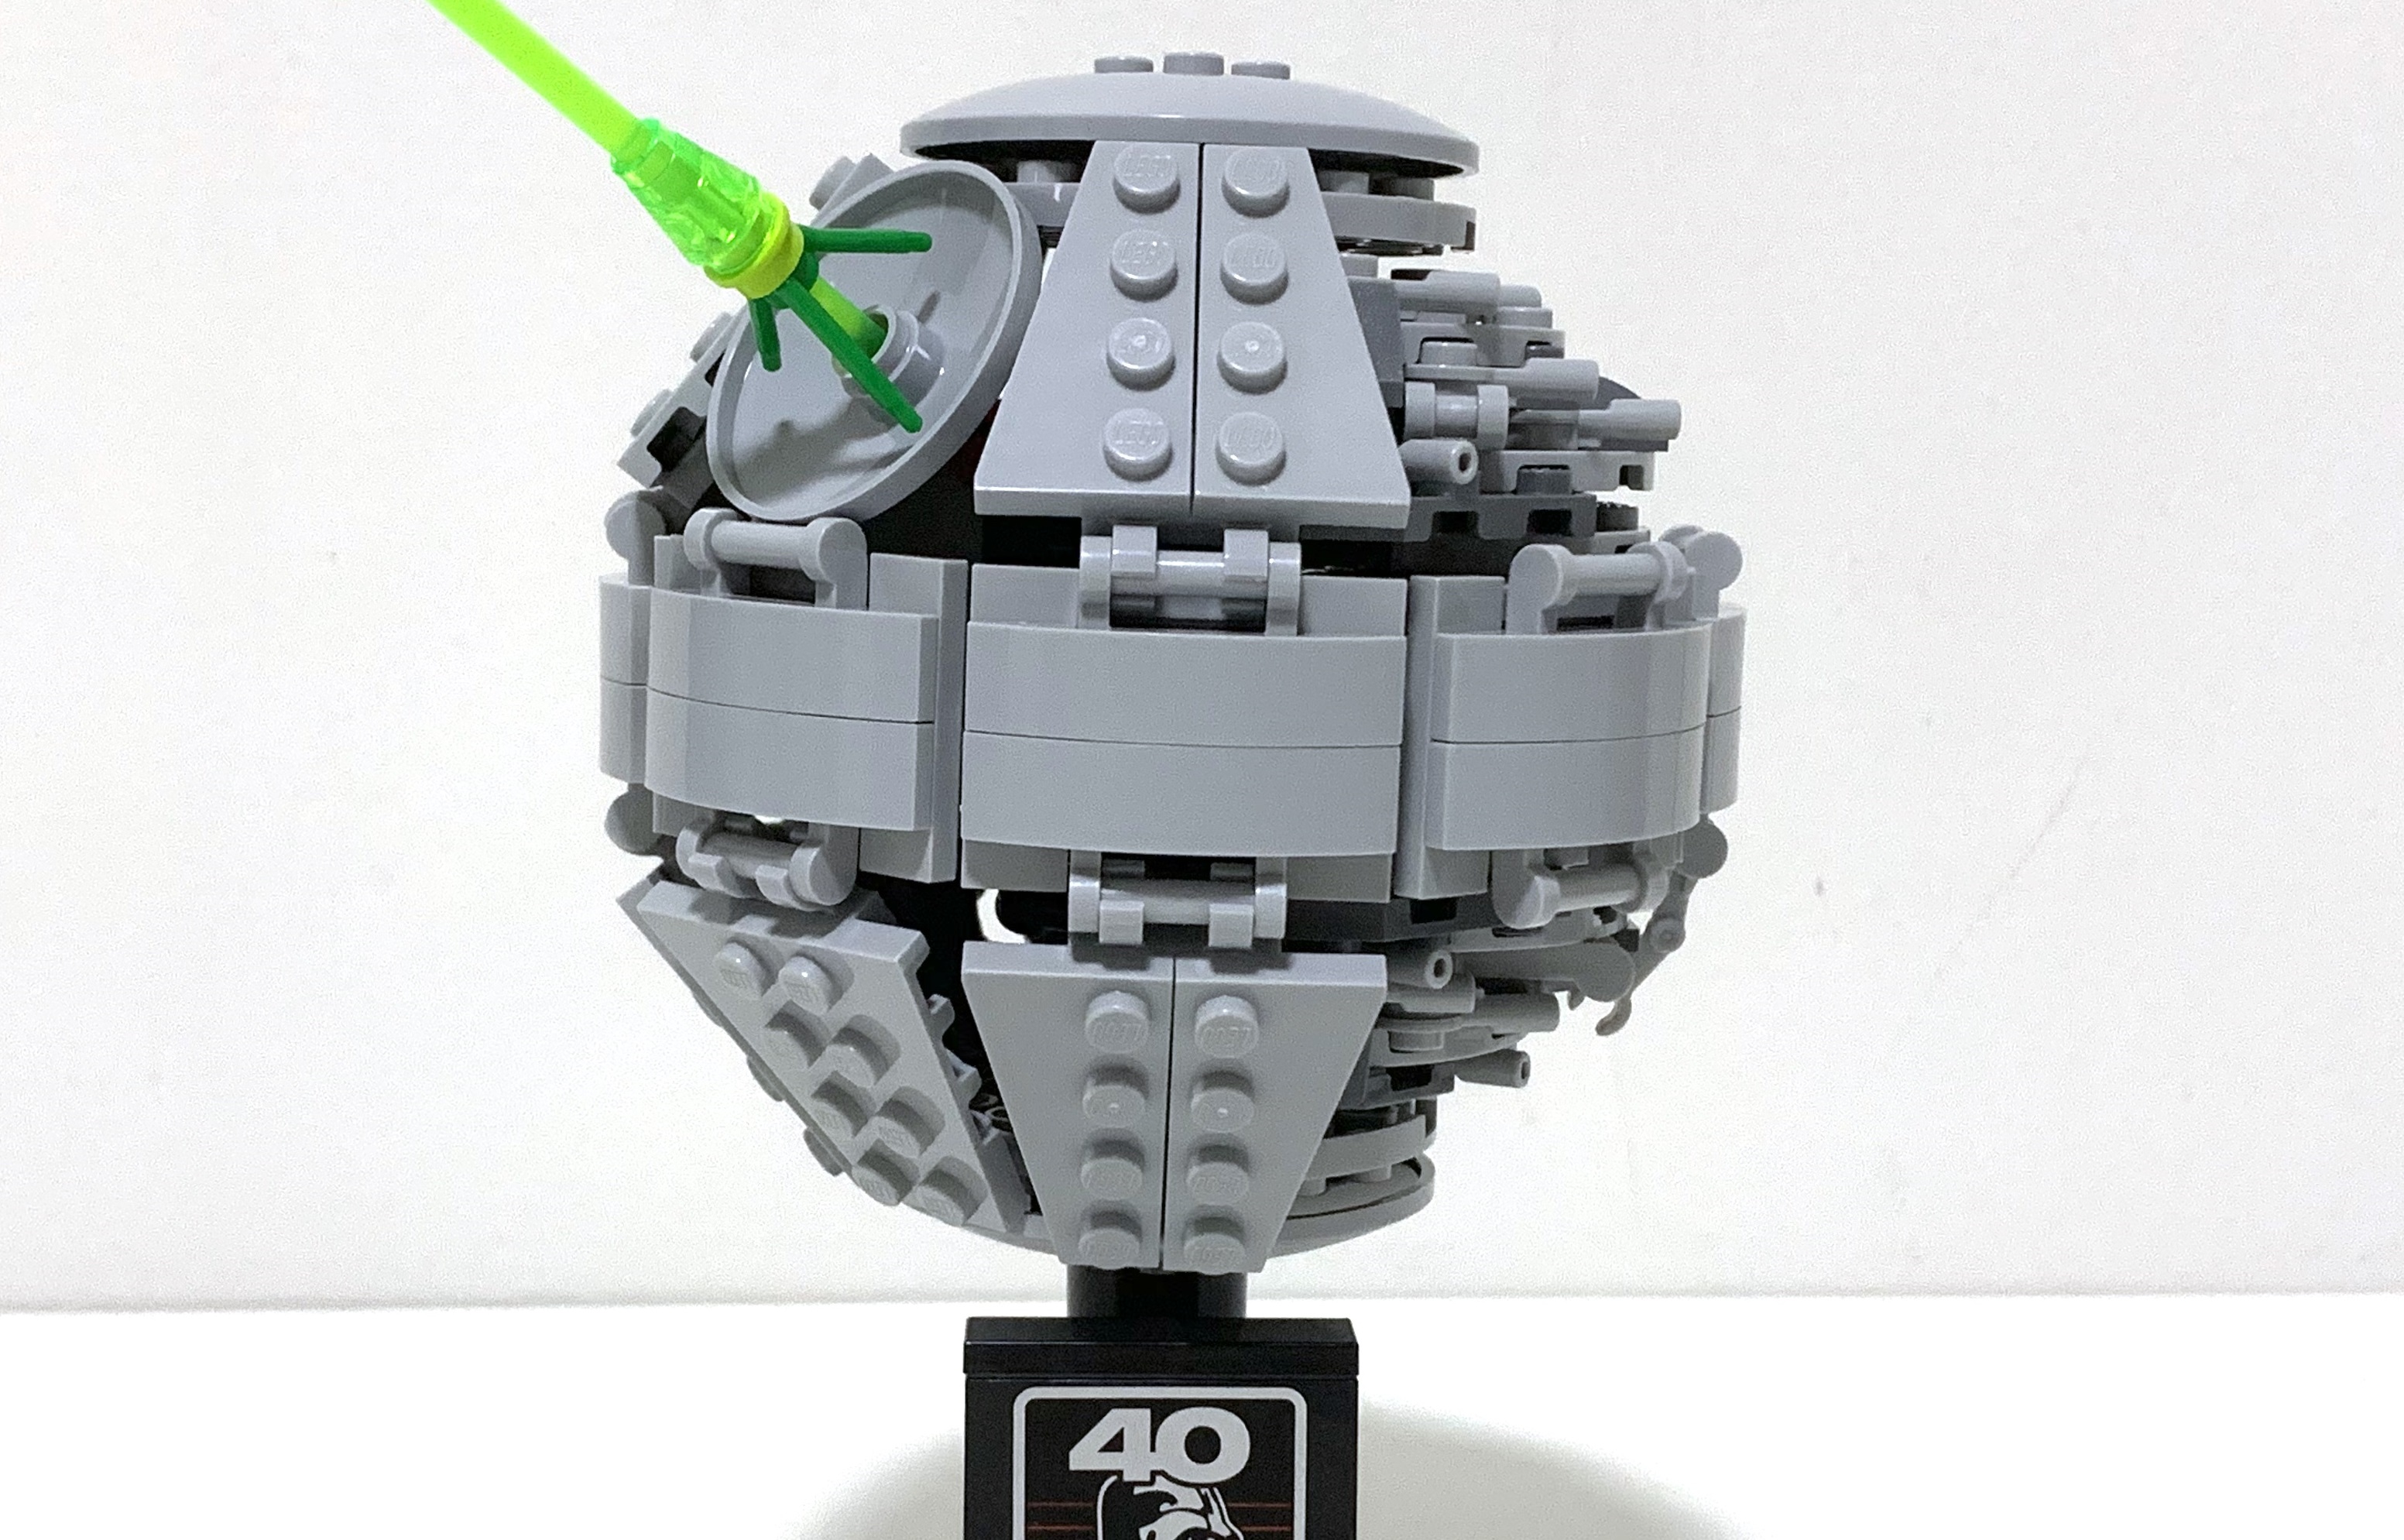 Review: LEGO 40591 Death Star II (May 4th GWP) - Jay's Brick Blog